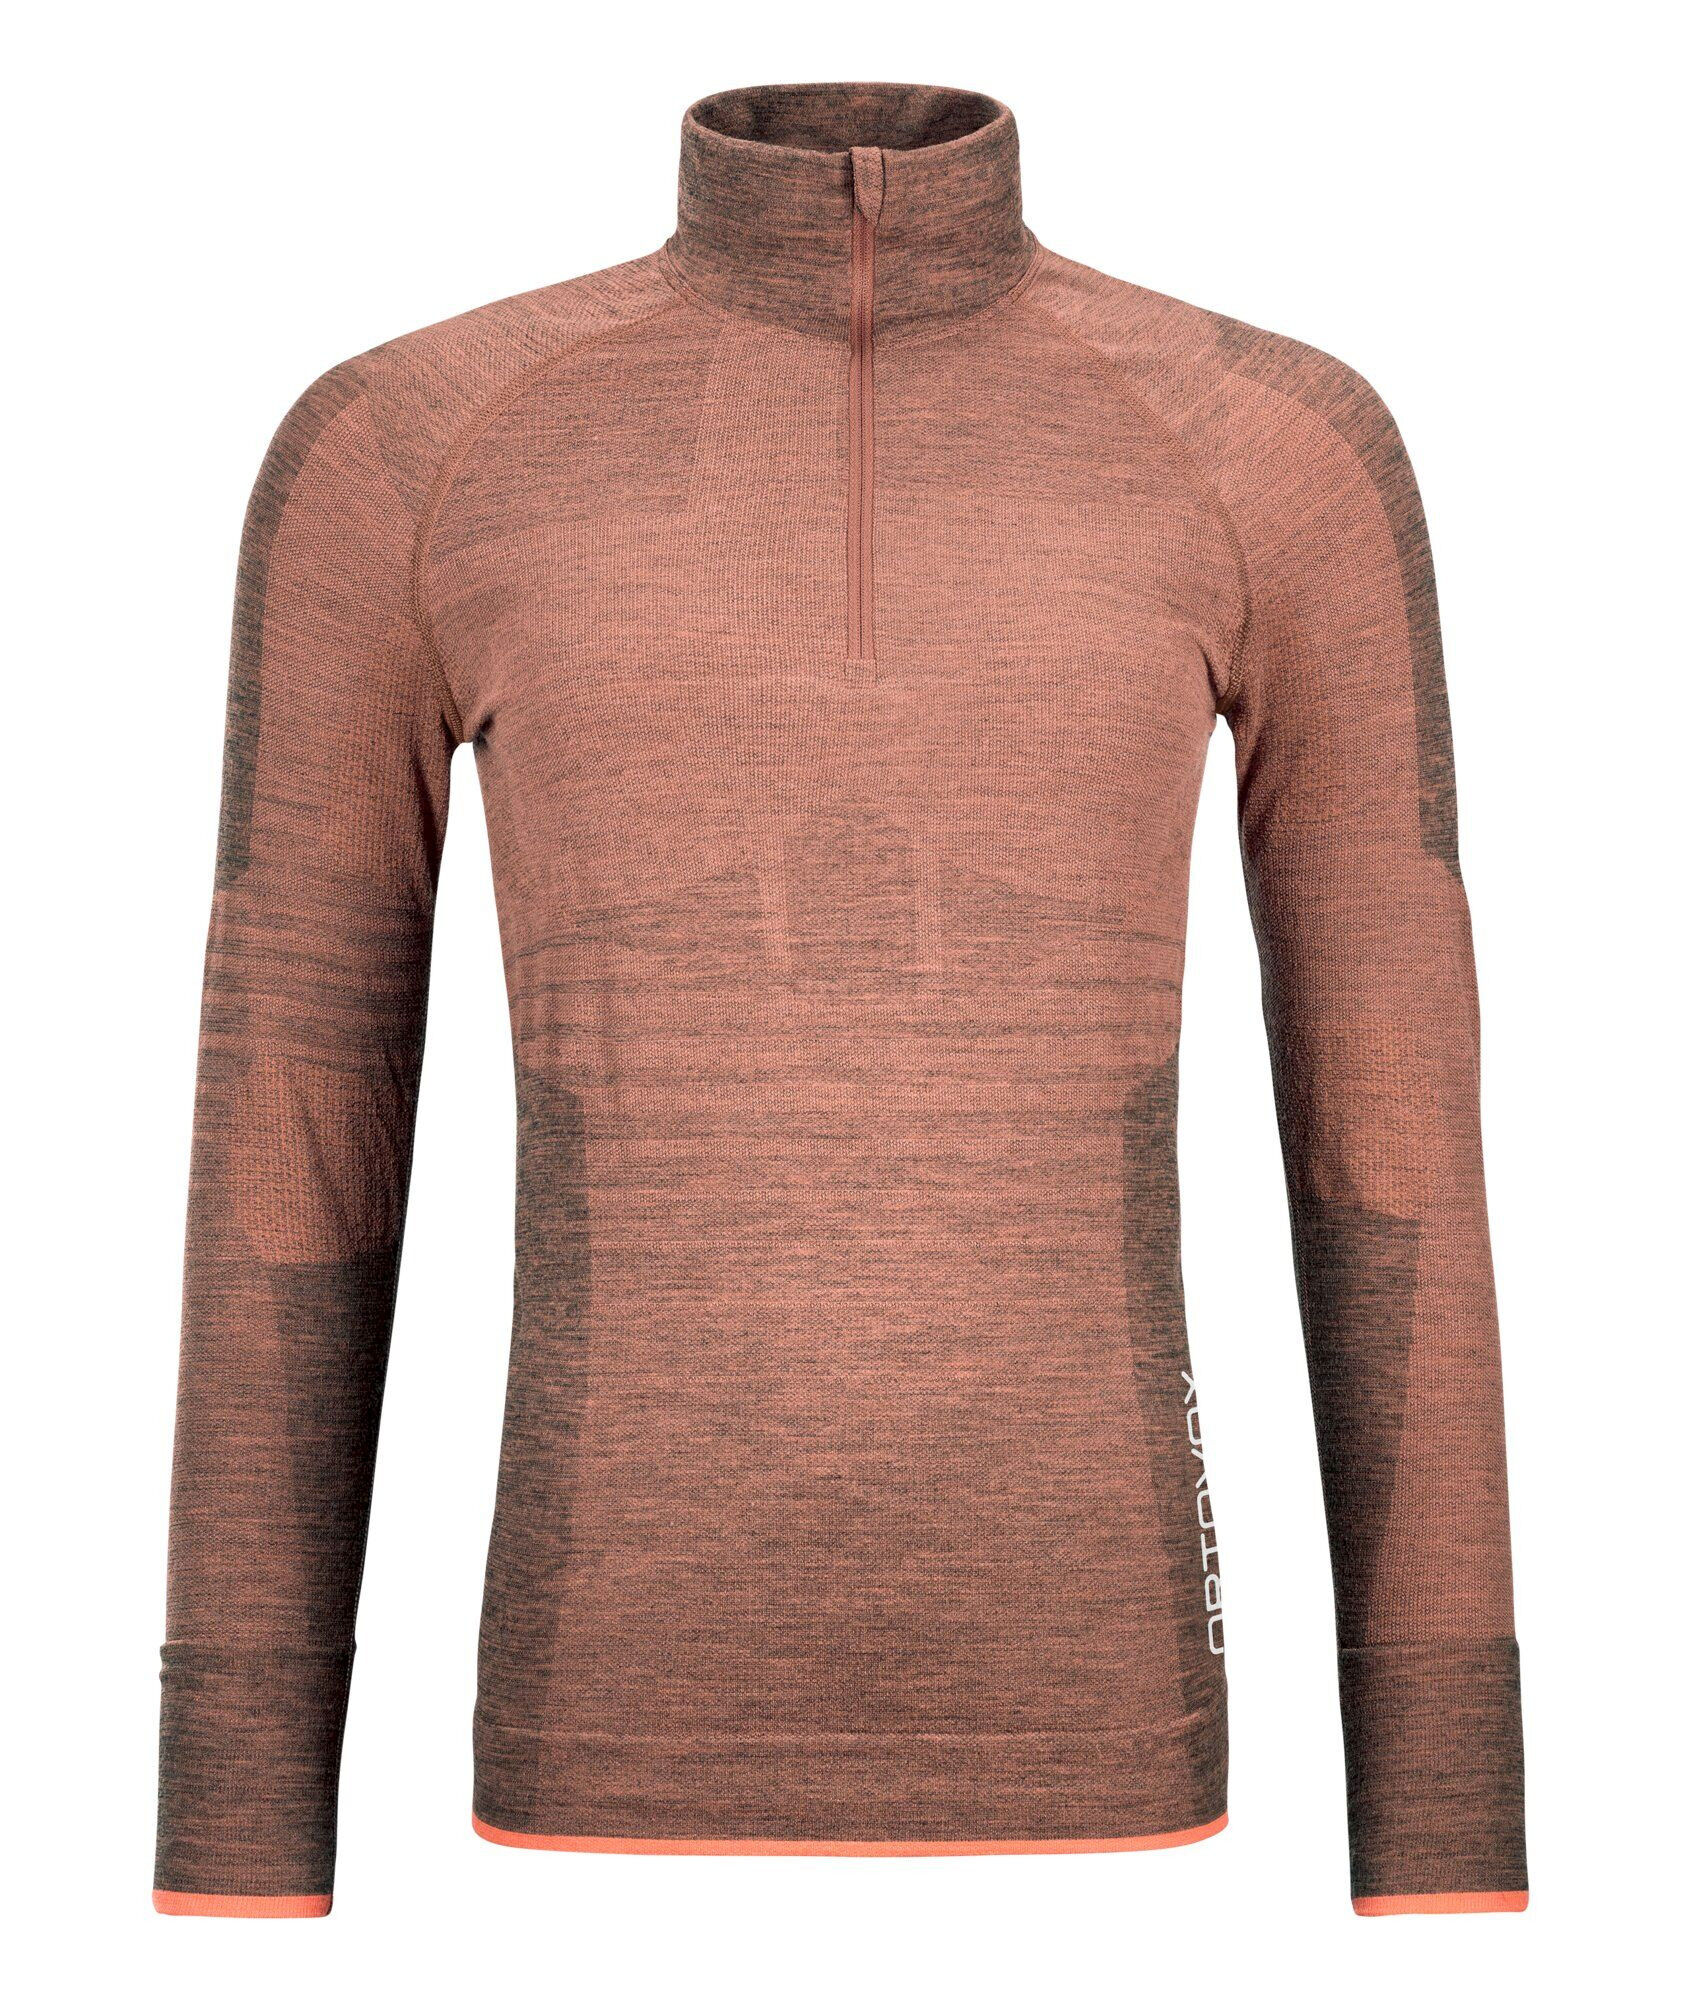 Ortovox 230 Competition Zip Neck - Base layer - Women's